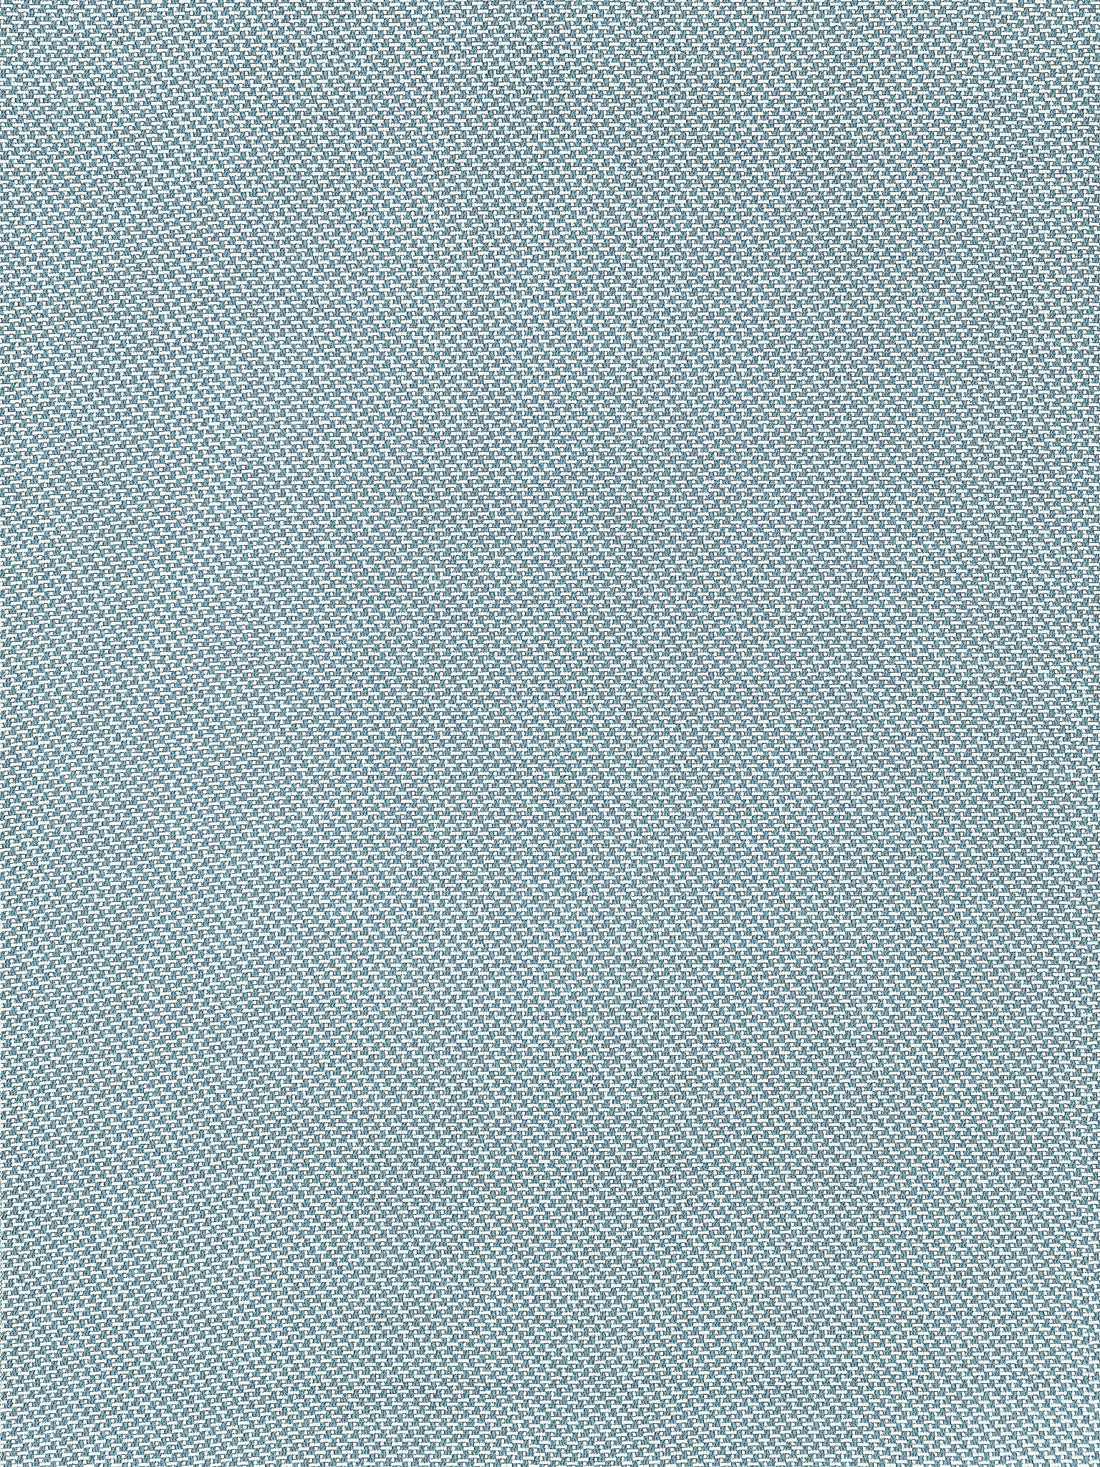 North Downs fabric in sky color - pattern number EY 000713ND - by Scalamandre in the Old World Weavers collection